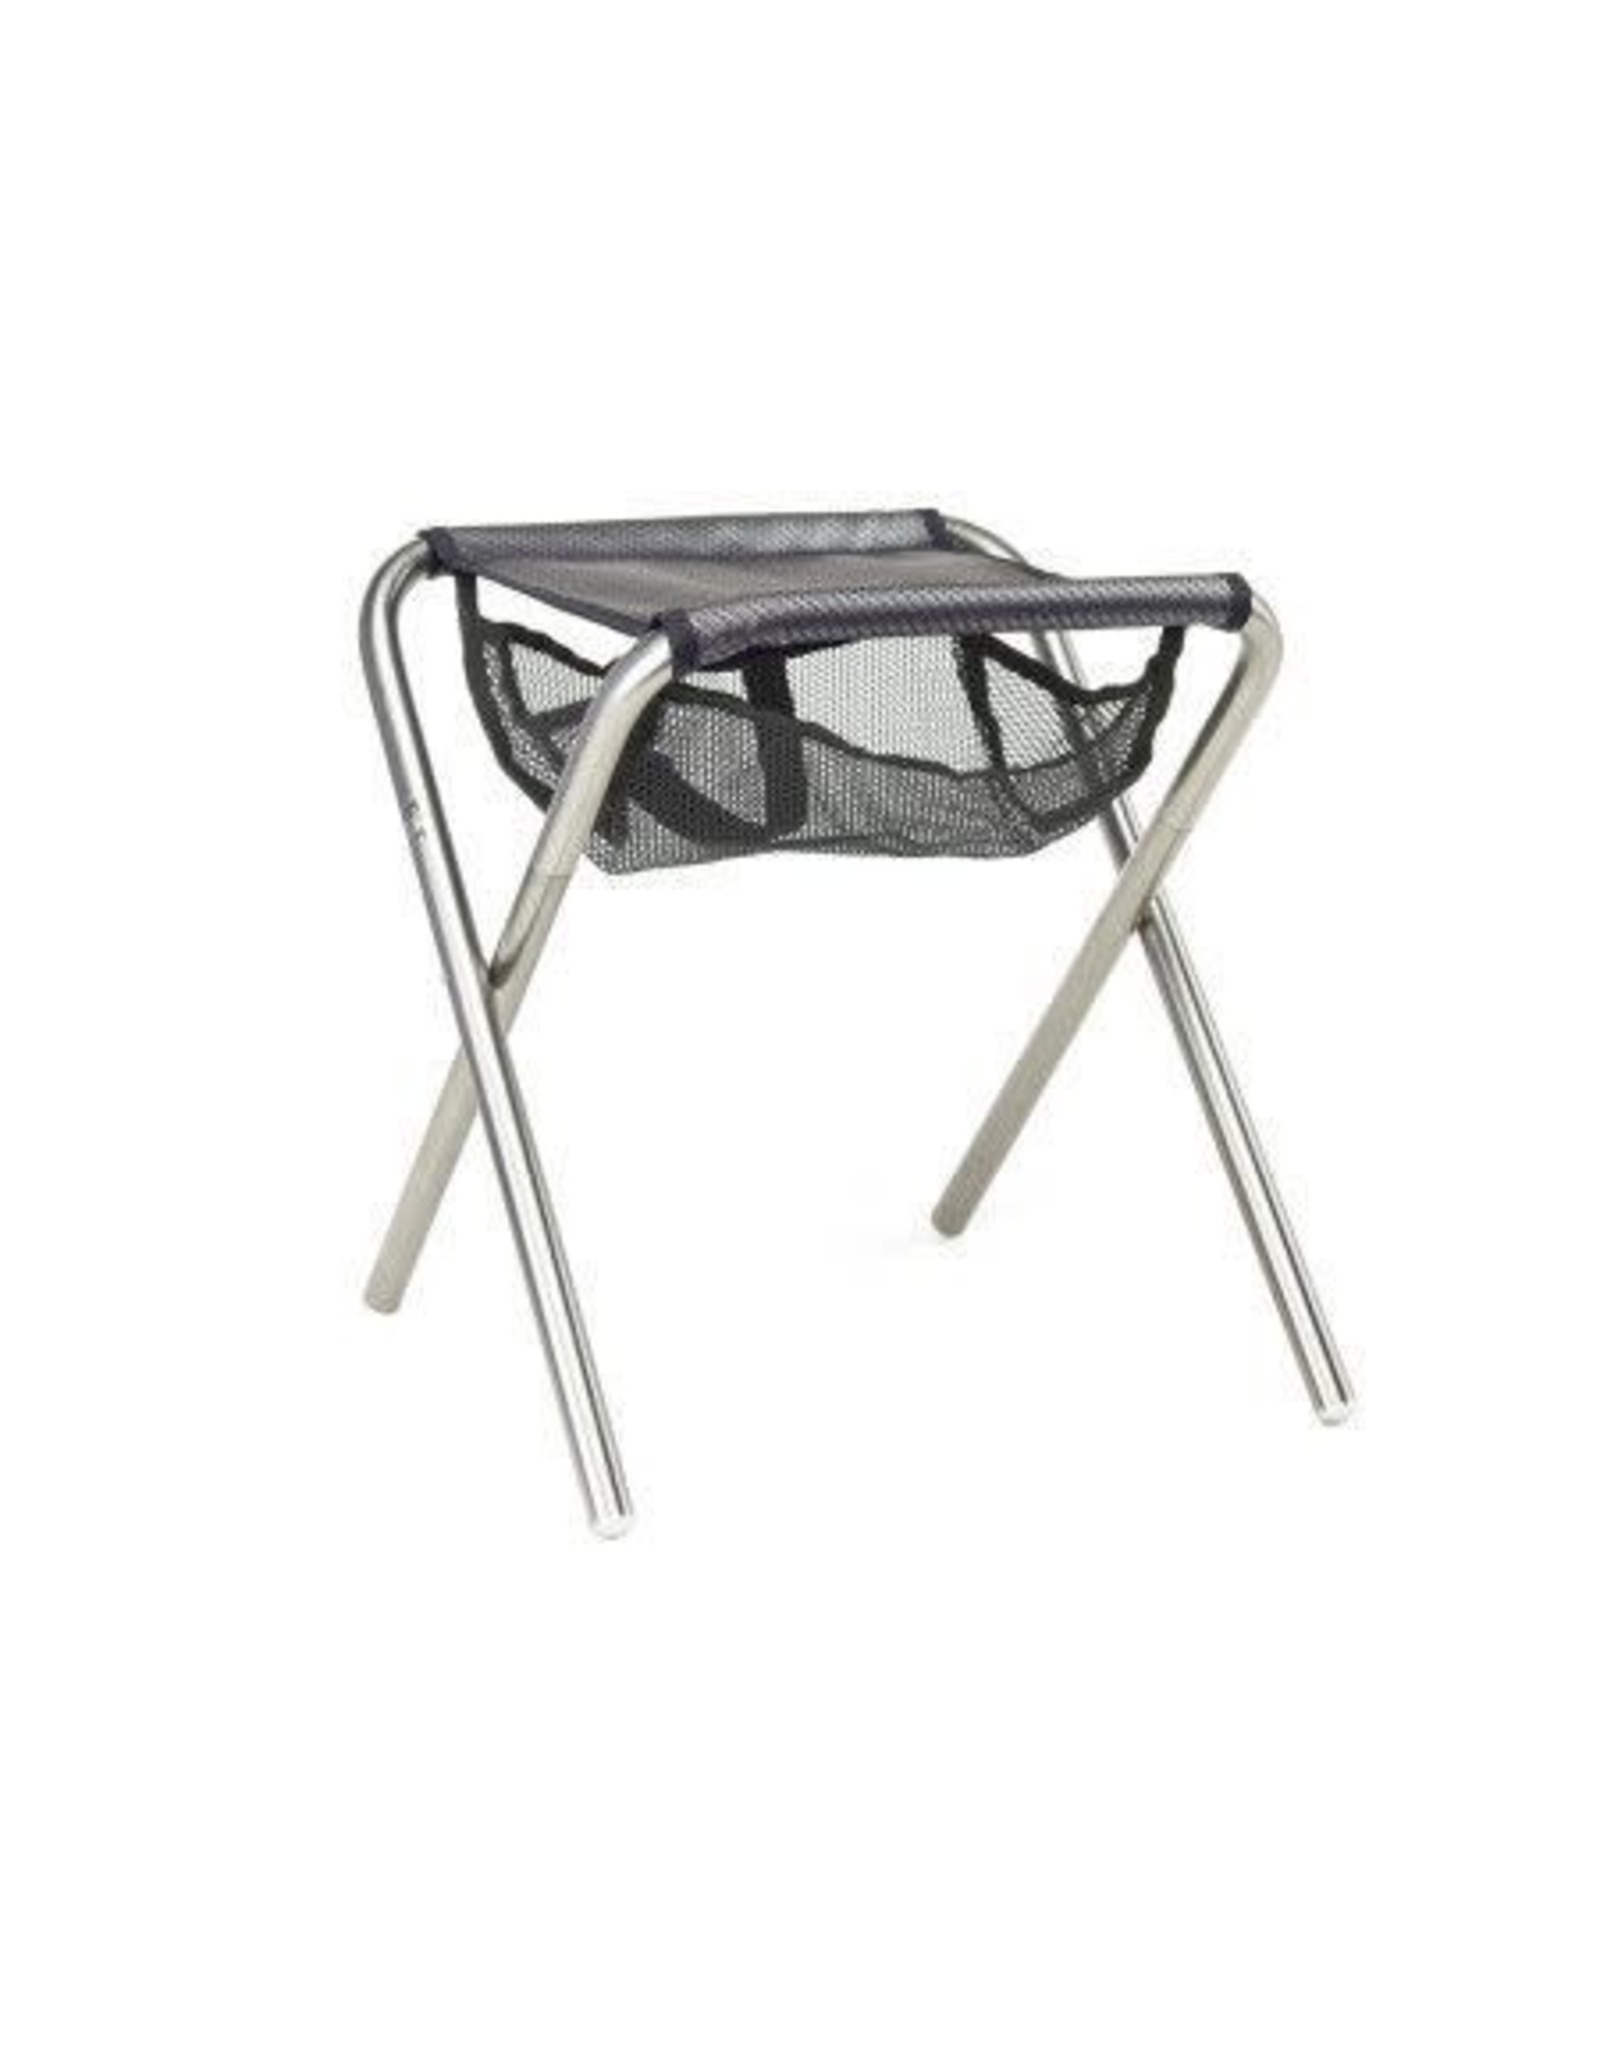 Grand Trunk GT collaspible campstool